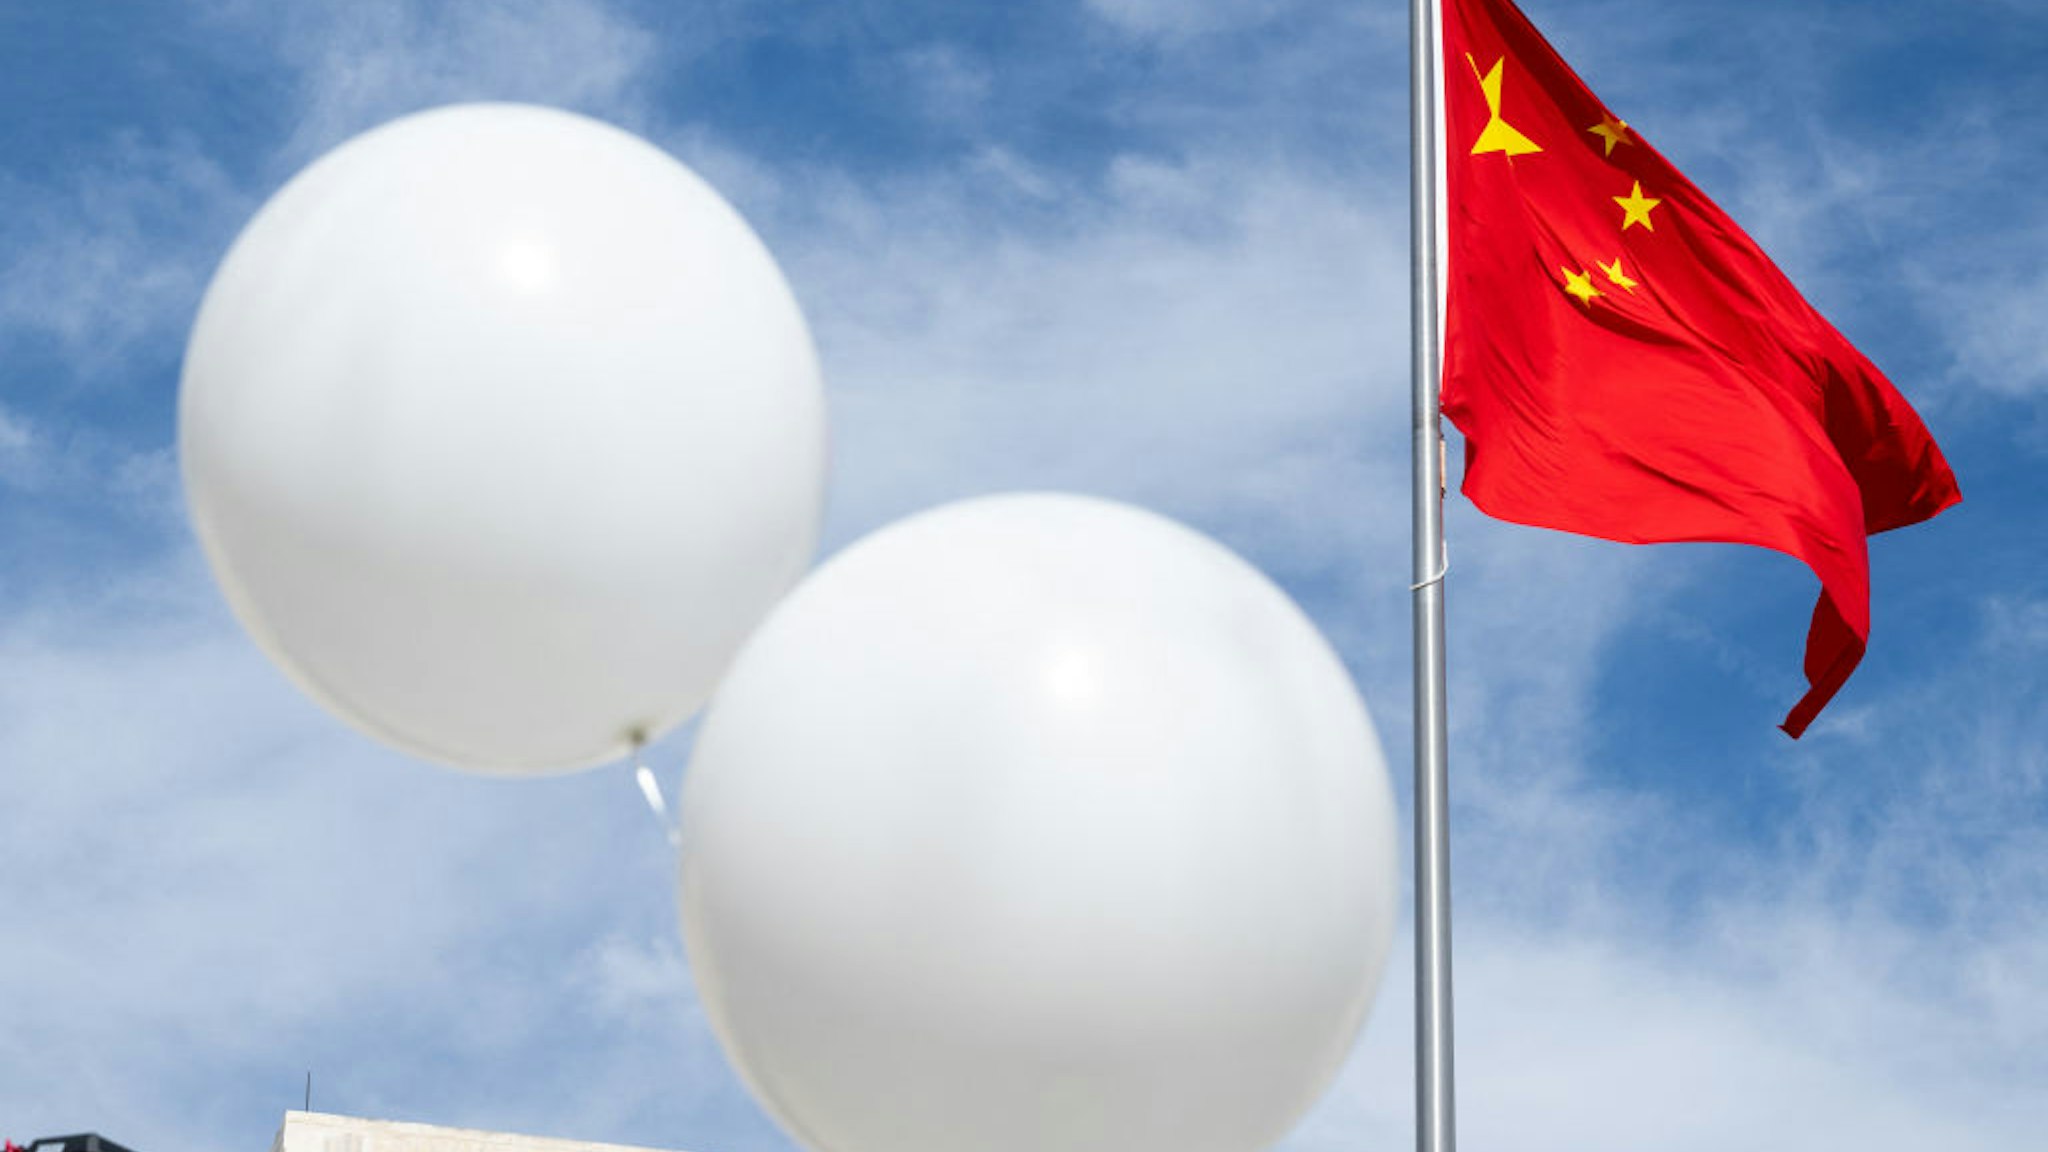 Two white balloons float near the Chinese flag as activist Rev. Patrick Mahoney protests against the Chinese government over the alleged Chinese surveillance balloon that was shot down over the US last week, during a demonstration outside the Chinese Embassy in Washington, DC, February 15, 2023. (Photo by SAUL LOEB / AFP) (Photo by SAUL